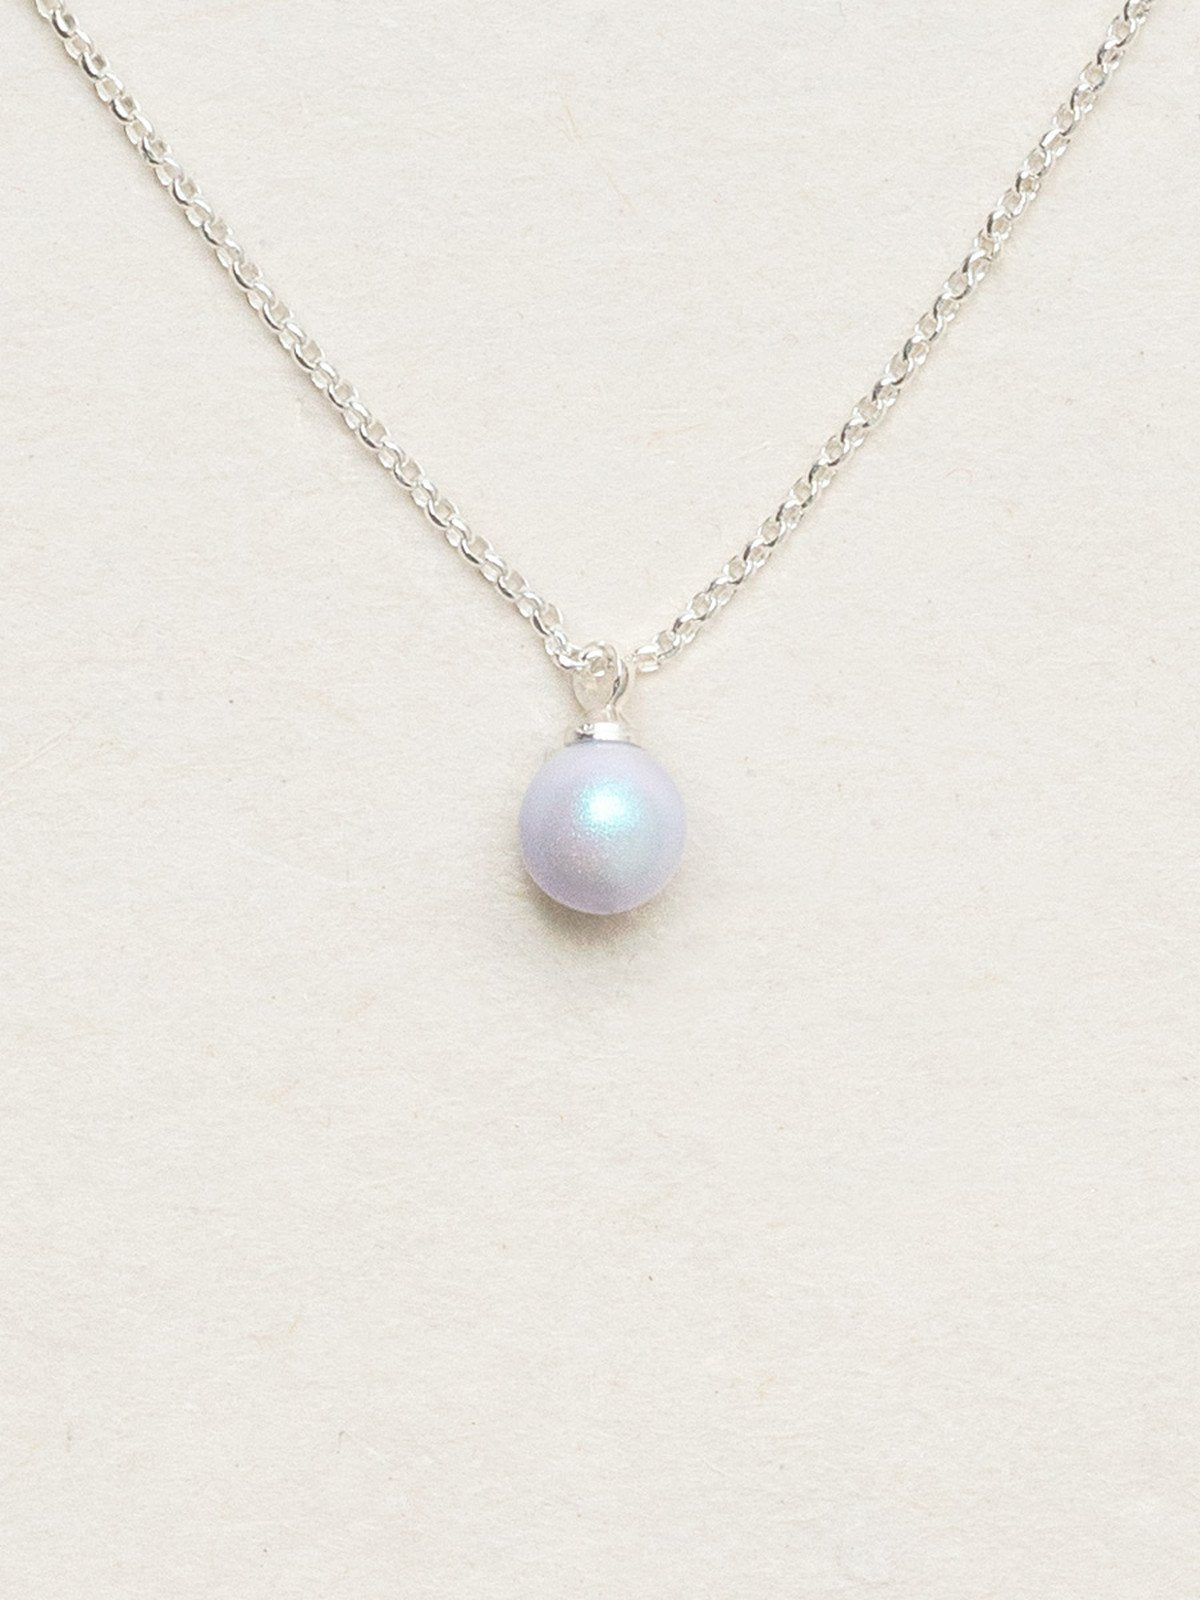 Holly Yashi Julianna Pearl Pendant Necklace - Iridescent Blue/Silver    